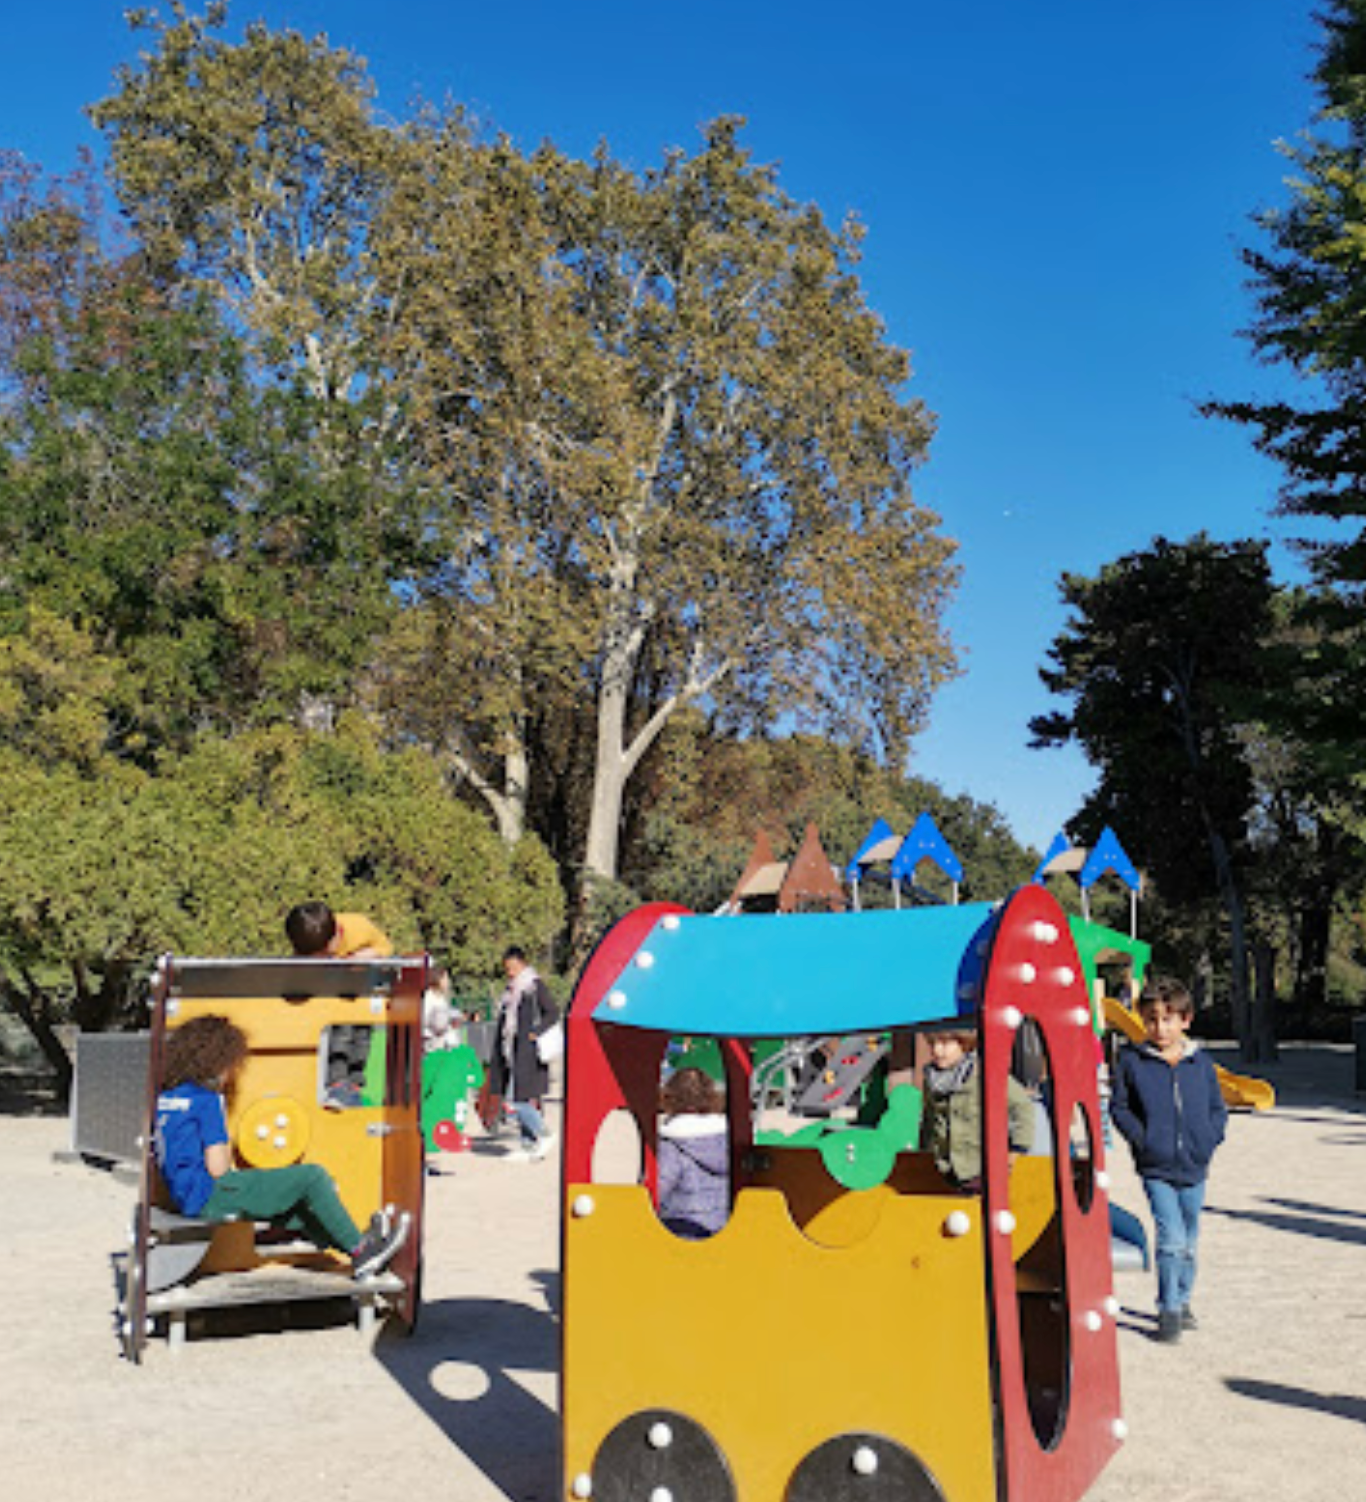 Playground in Parc Monceau